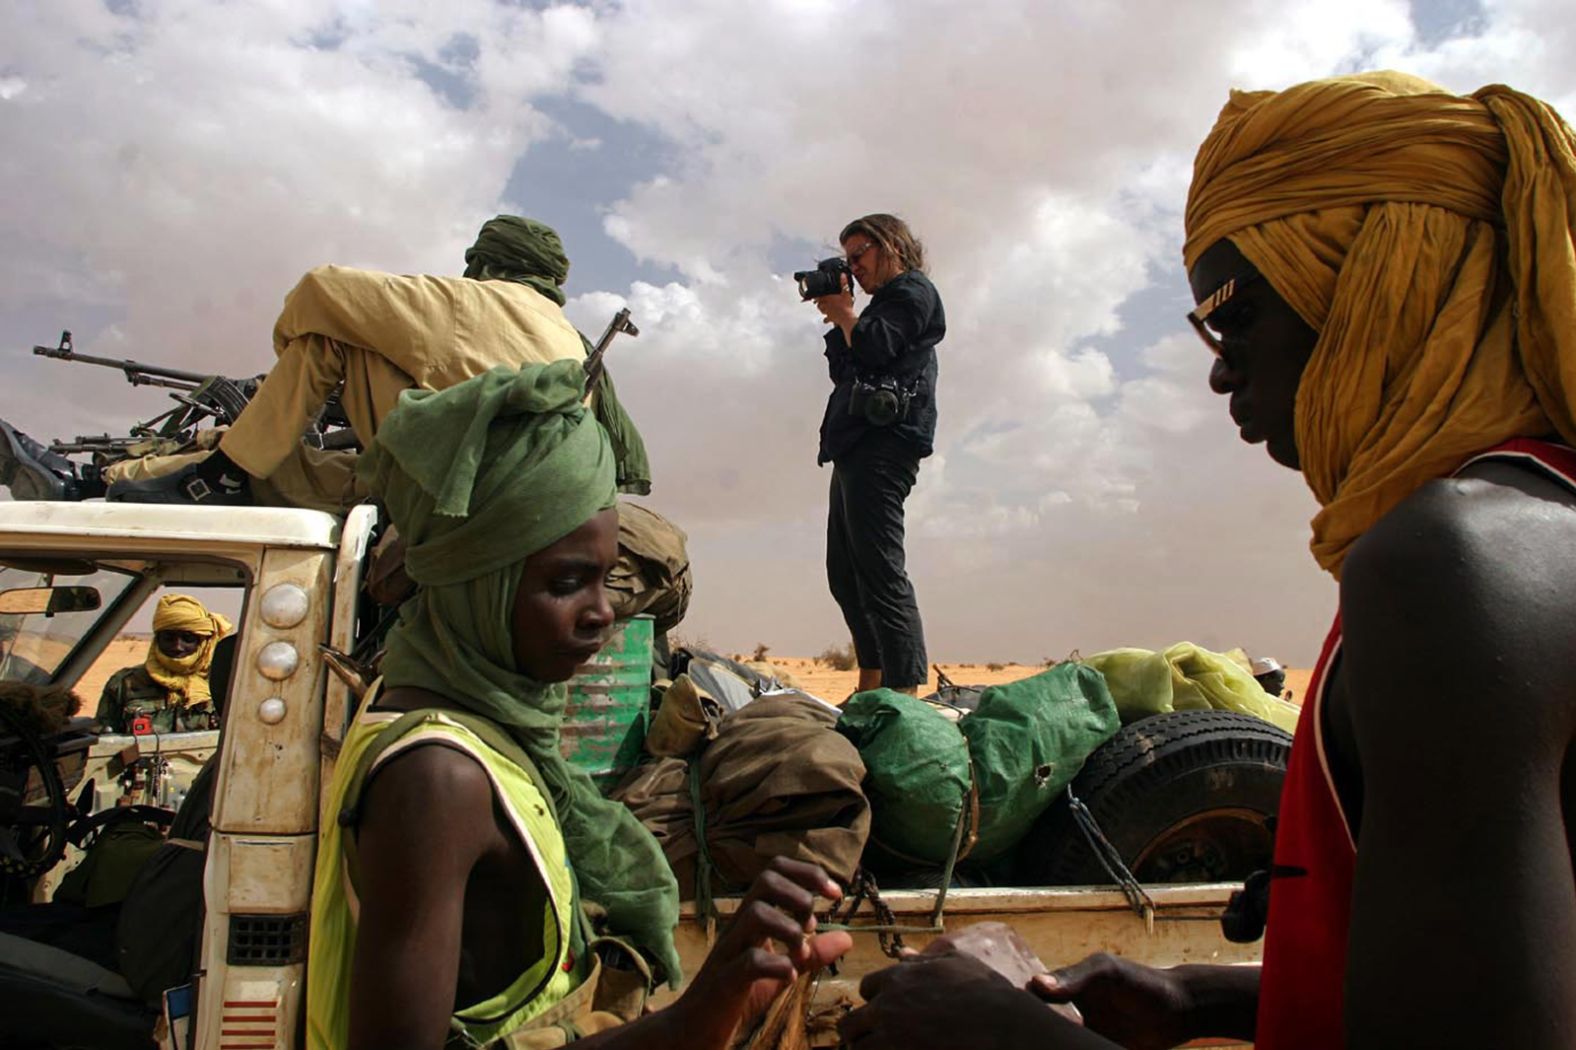 <a href="http://www.lynseyaddario.com/" target="_blank" target="_blank">Lynsey Addario</a> photographs rebels in Sudan's Darfur region in 2004. Addario has covered conflicts and humanitarian crises in many countries, including Afghanistan, Iraq, Libya, Syria and Somalia. Her work in Afghanistan contributed to a Pulitzer Prize that The New York Times won in 2009 for international reporting. Addario has been kidnapped twice while working in war zones. Her memoir, "It's What I Do," was a New York Times best-seller. 